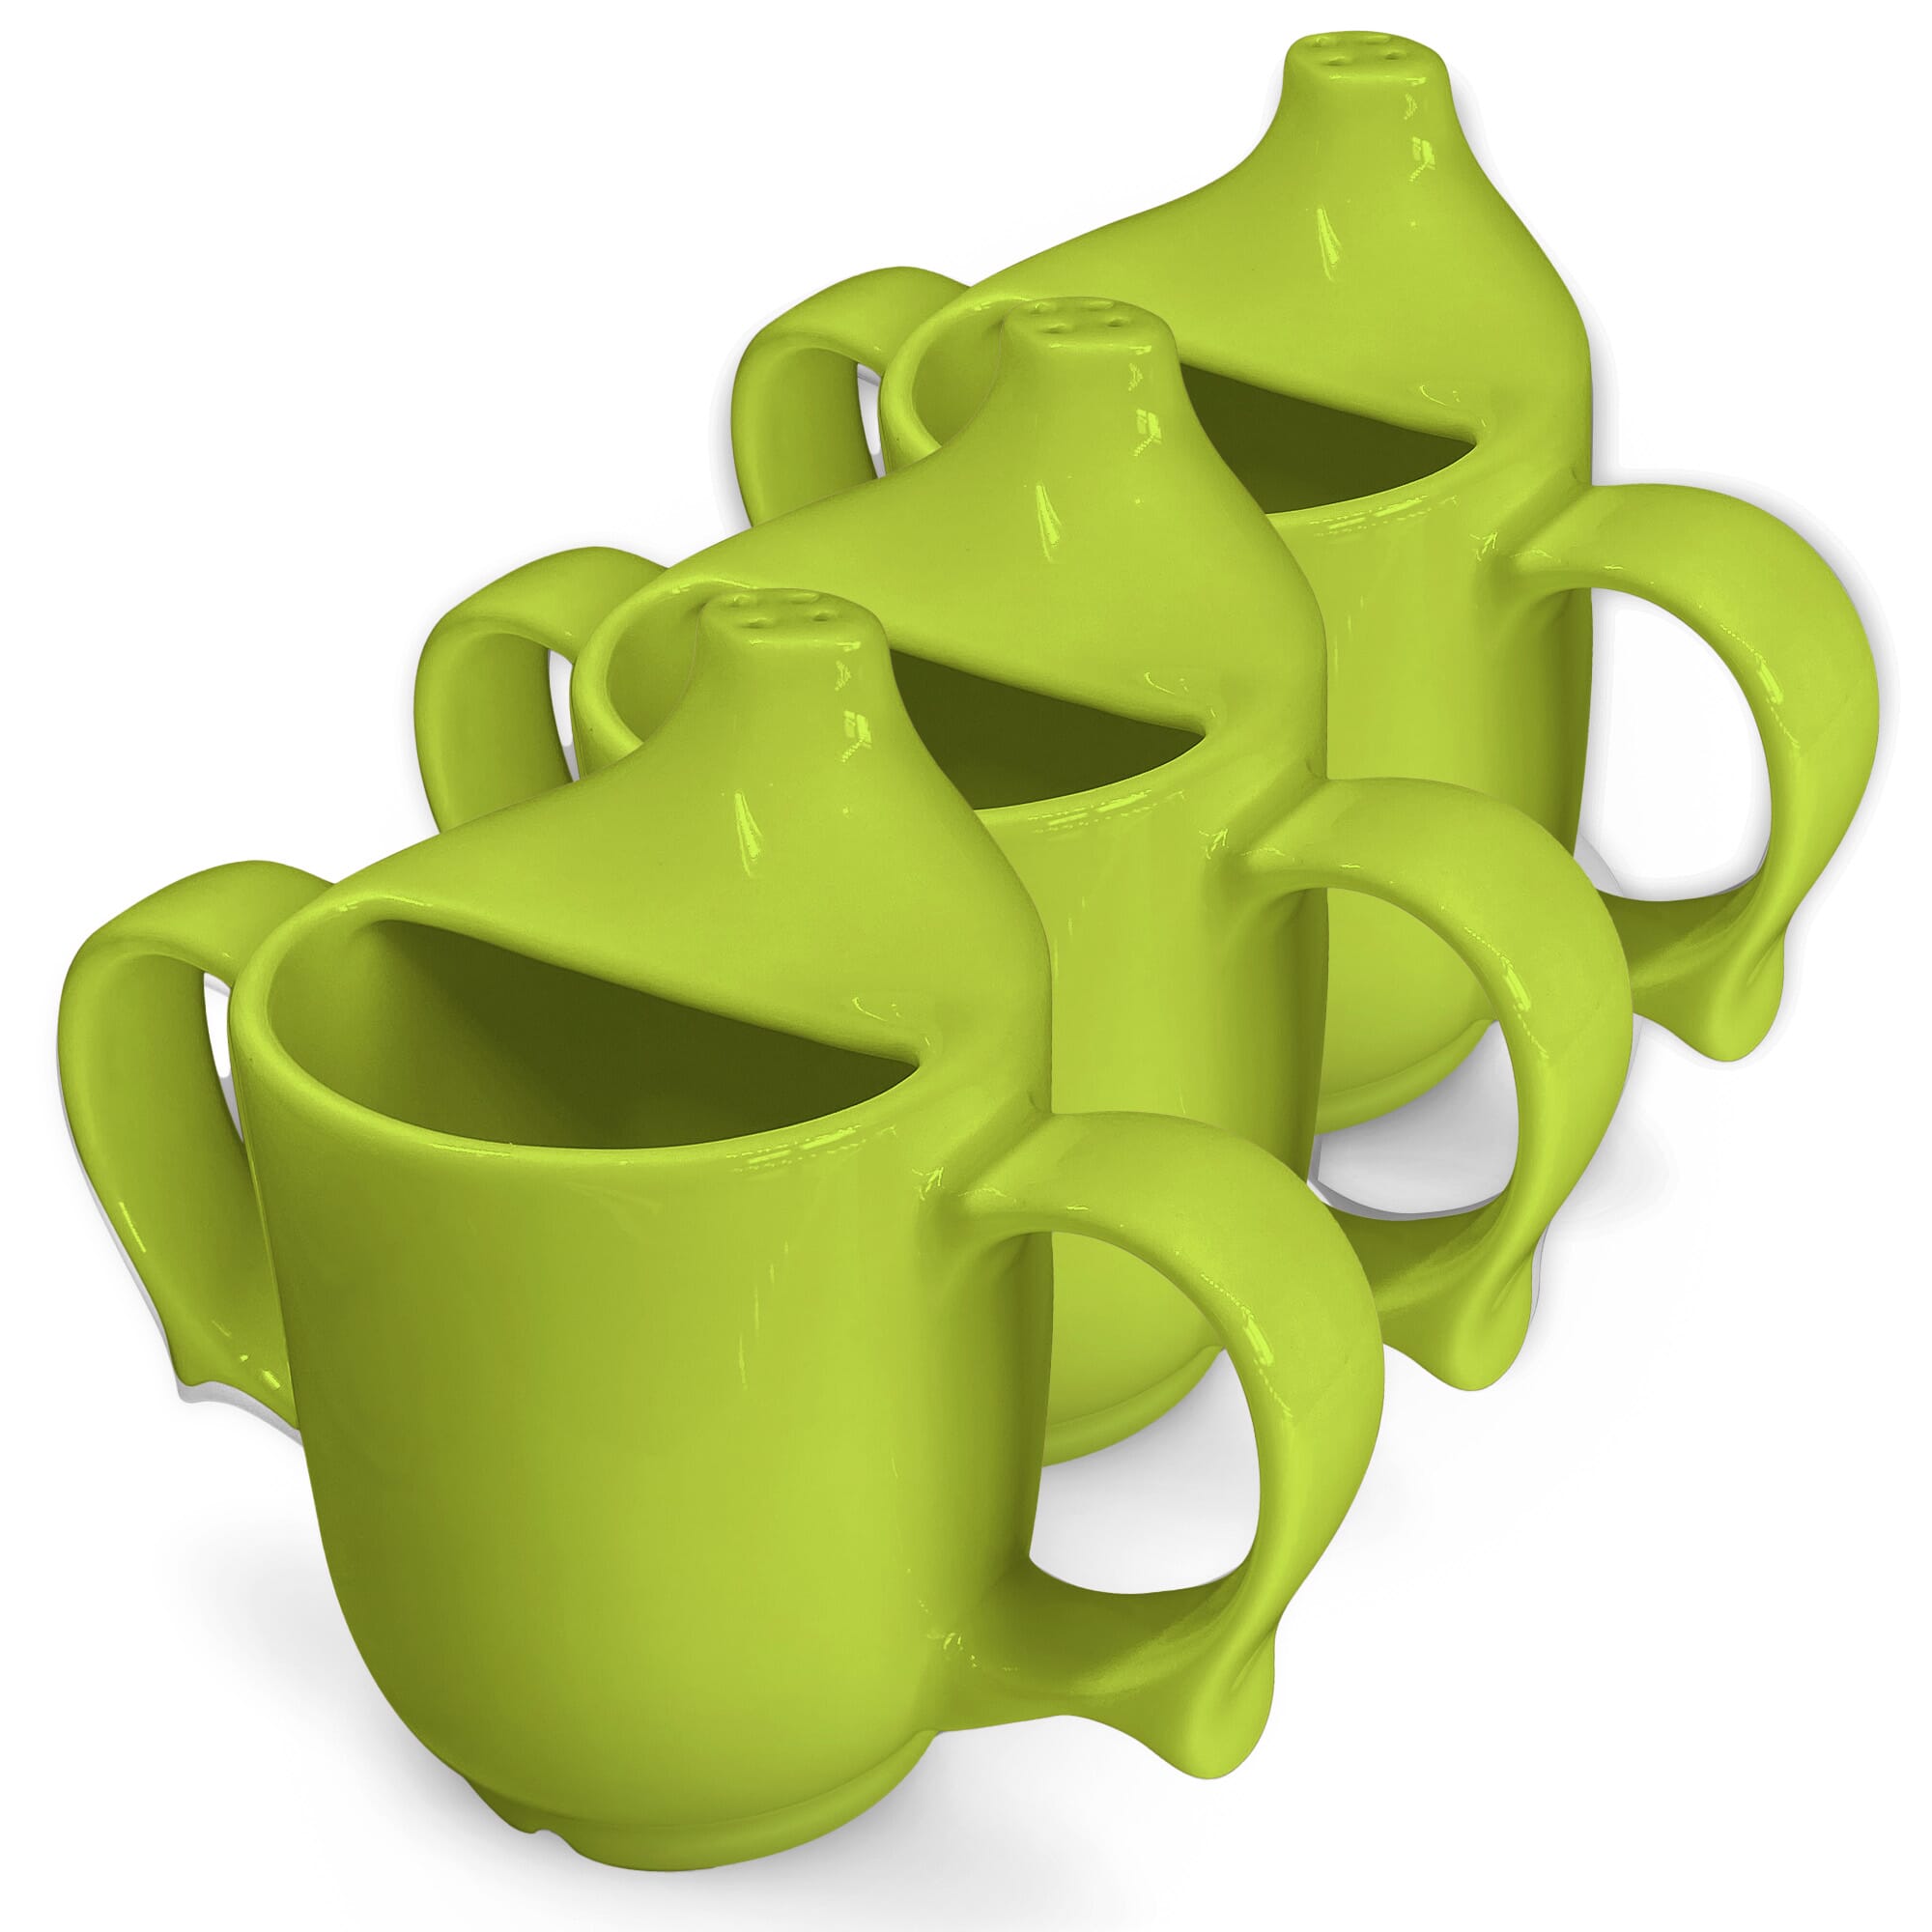 View Dignity Two Handled Drinking Cup Green Pack of 3 information